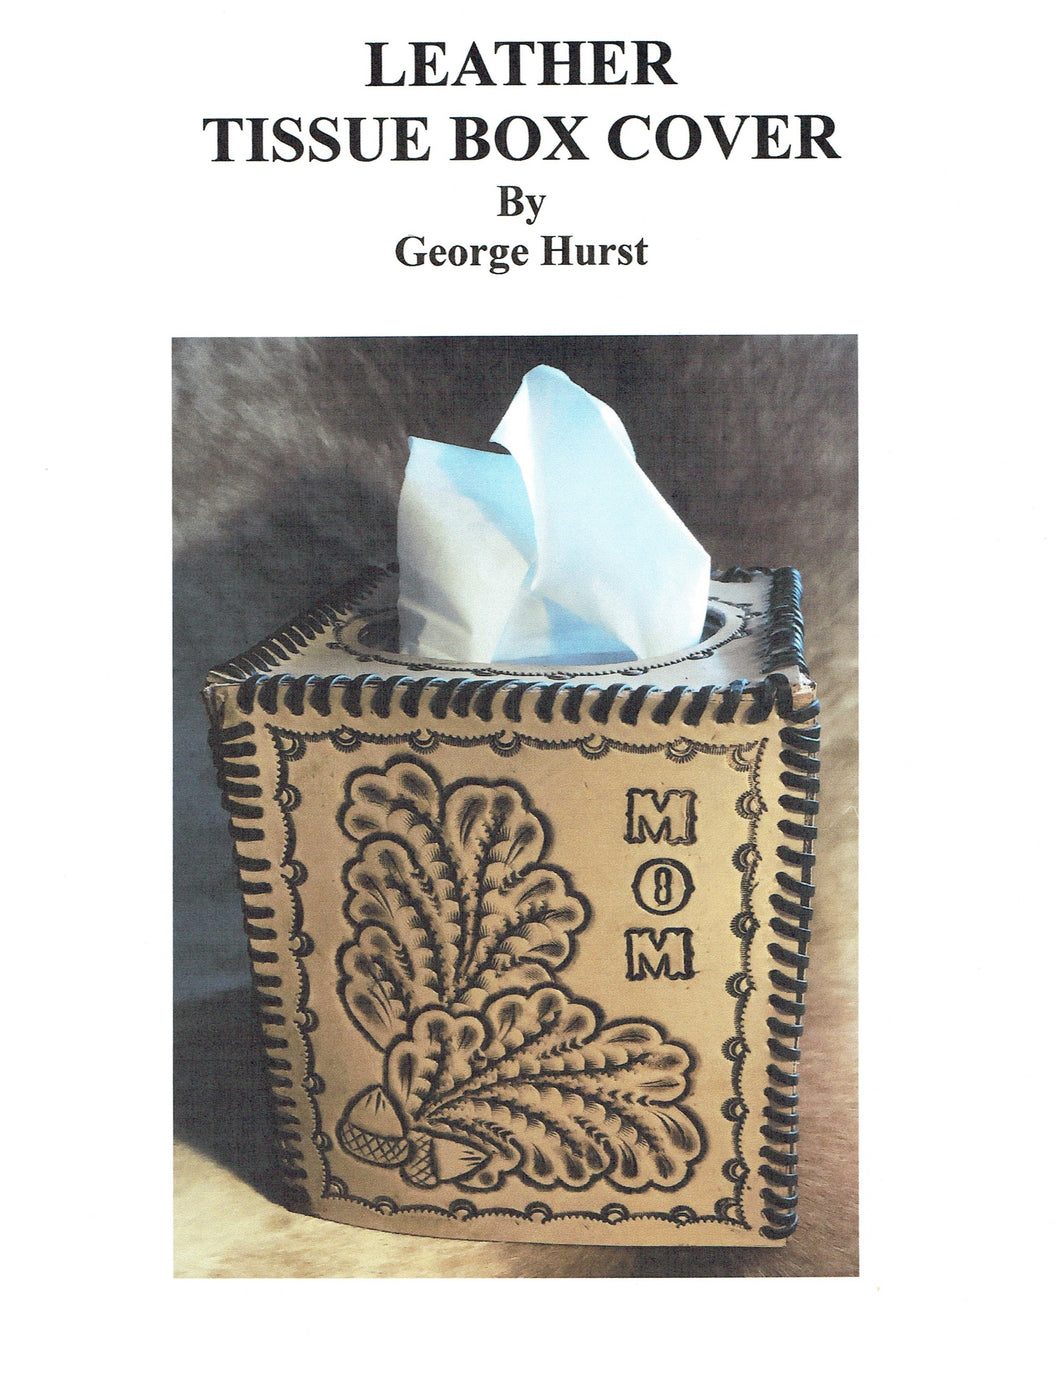 Leather Tissue Box Cover by George Hurst